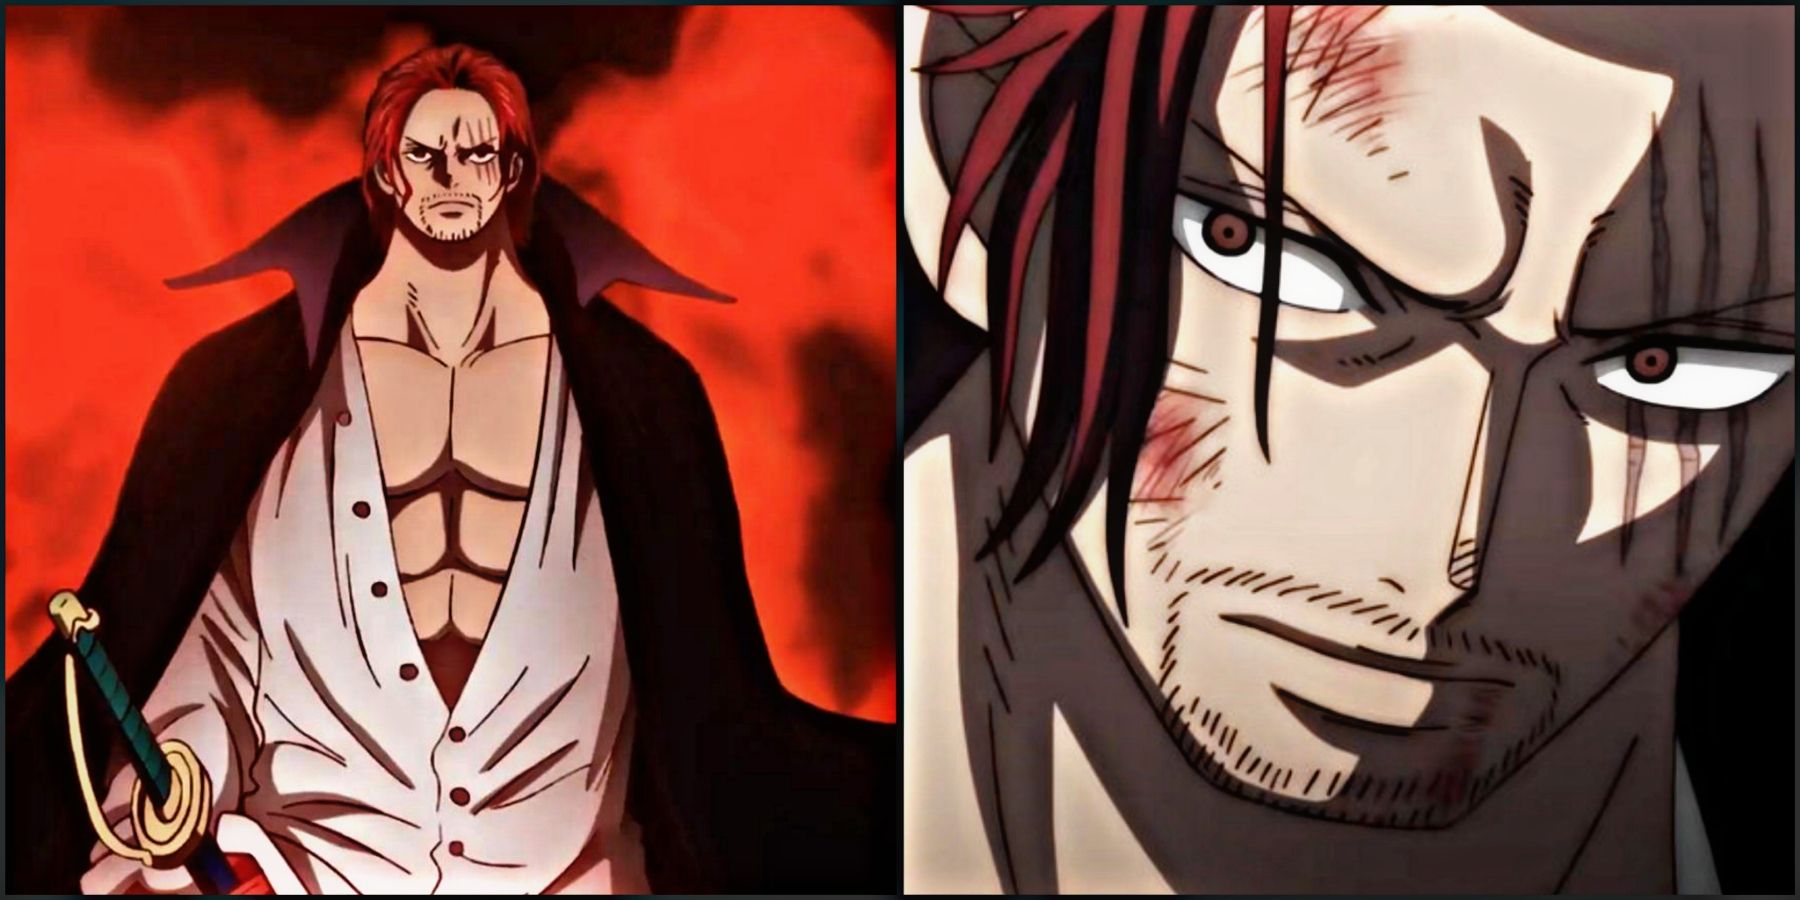 Who is stronger, Black Beard or Shanks in the One Piece anime? - Quora